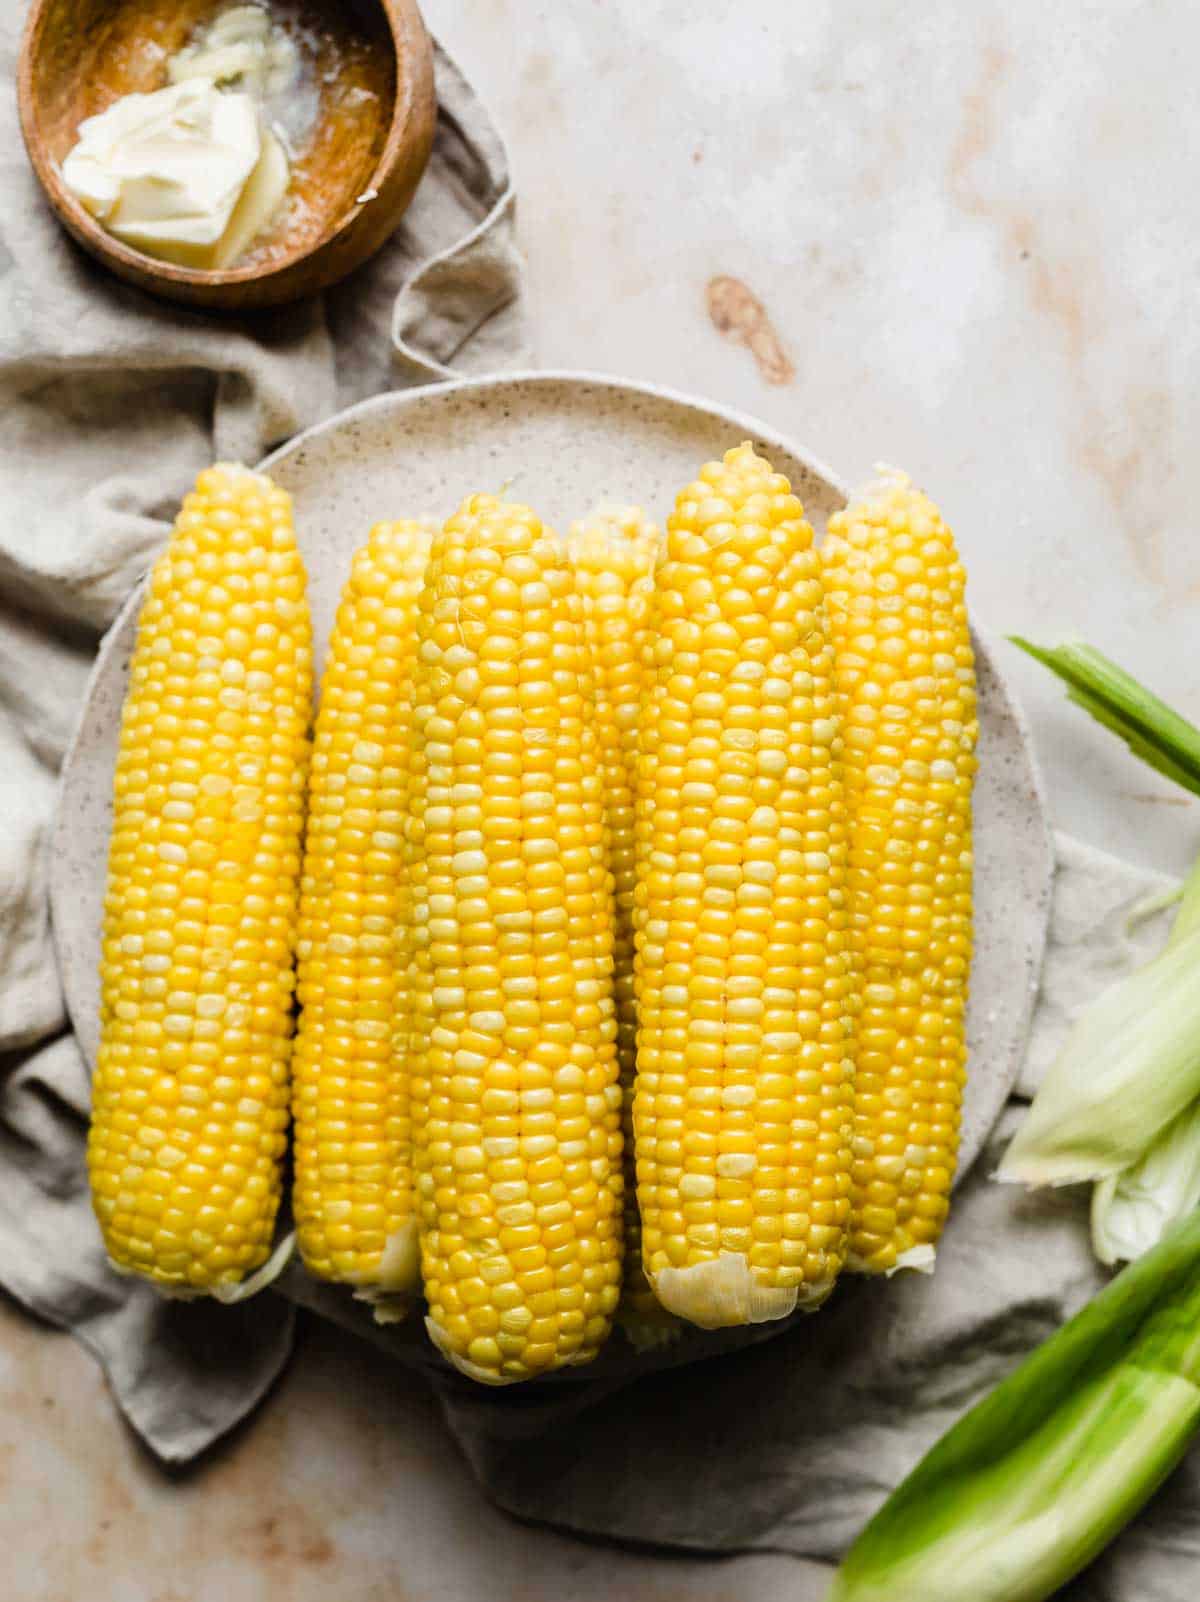 How to boil corn perfectly, showing six cooked corns on a plate.